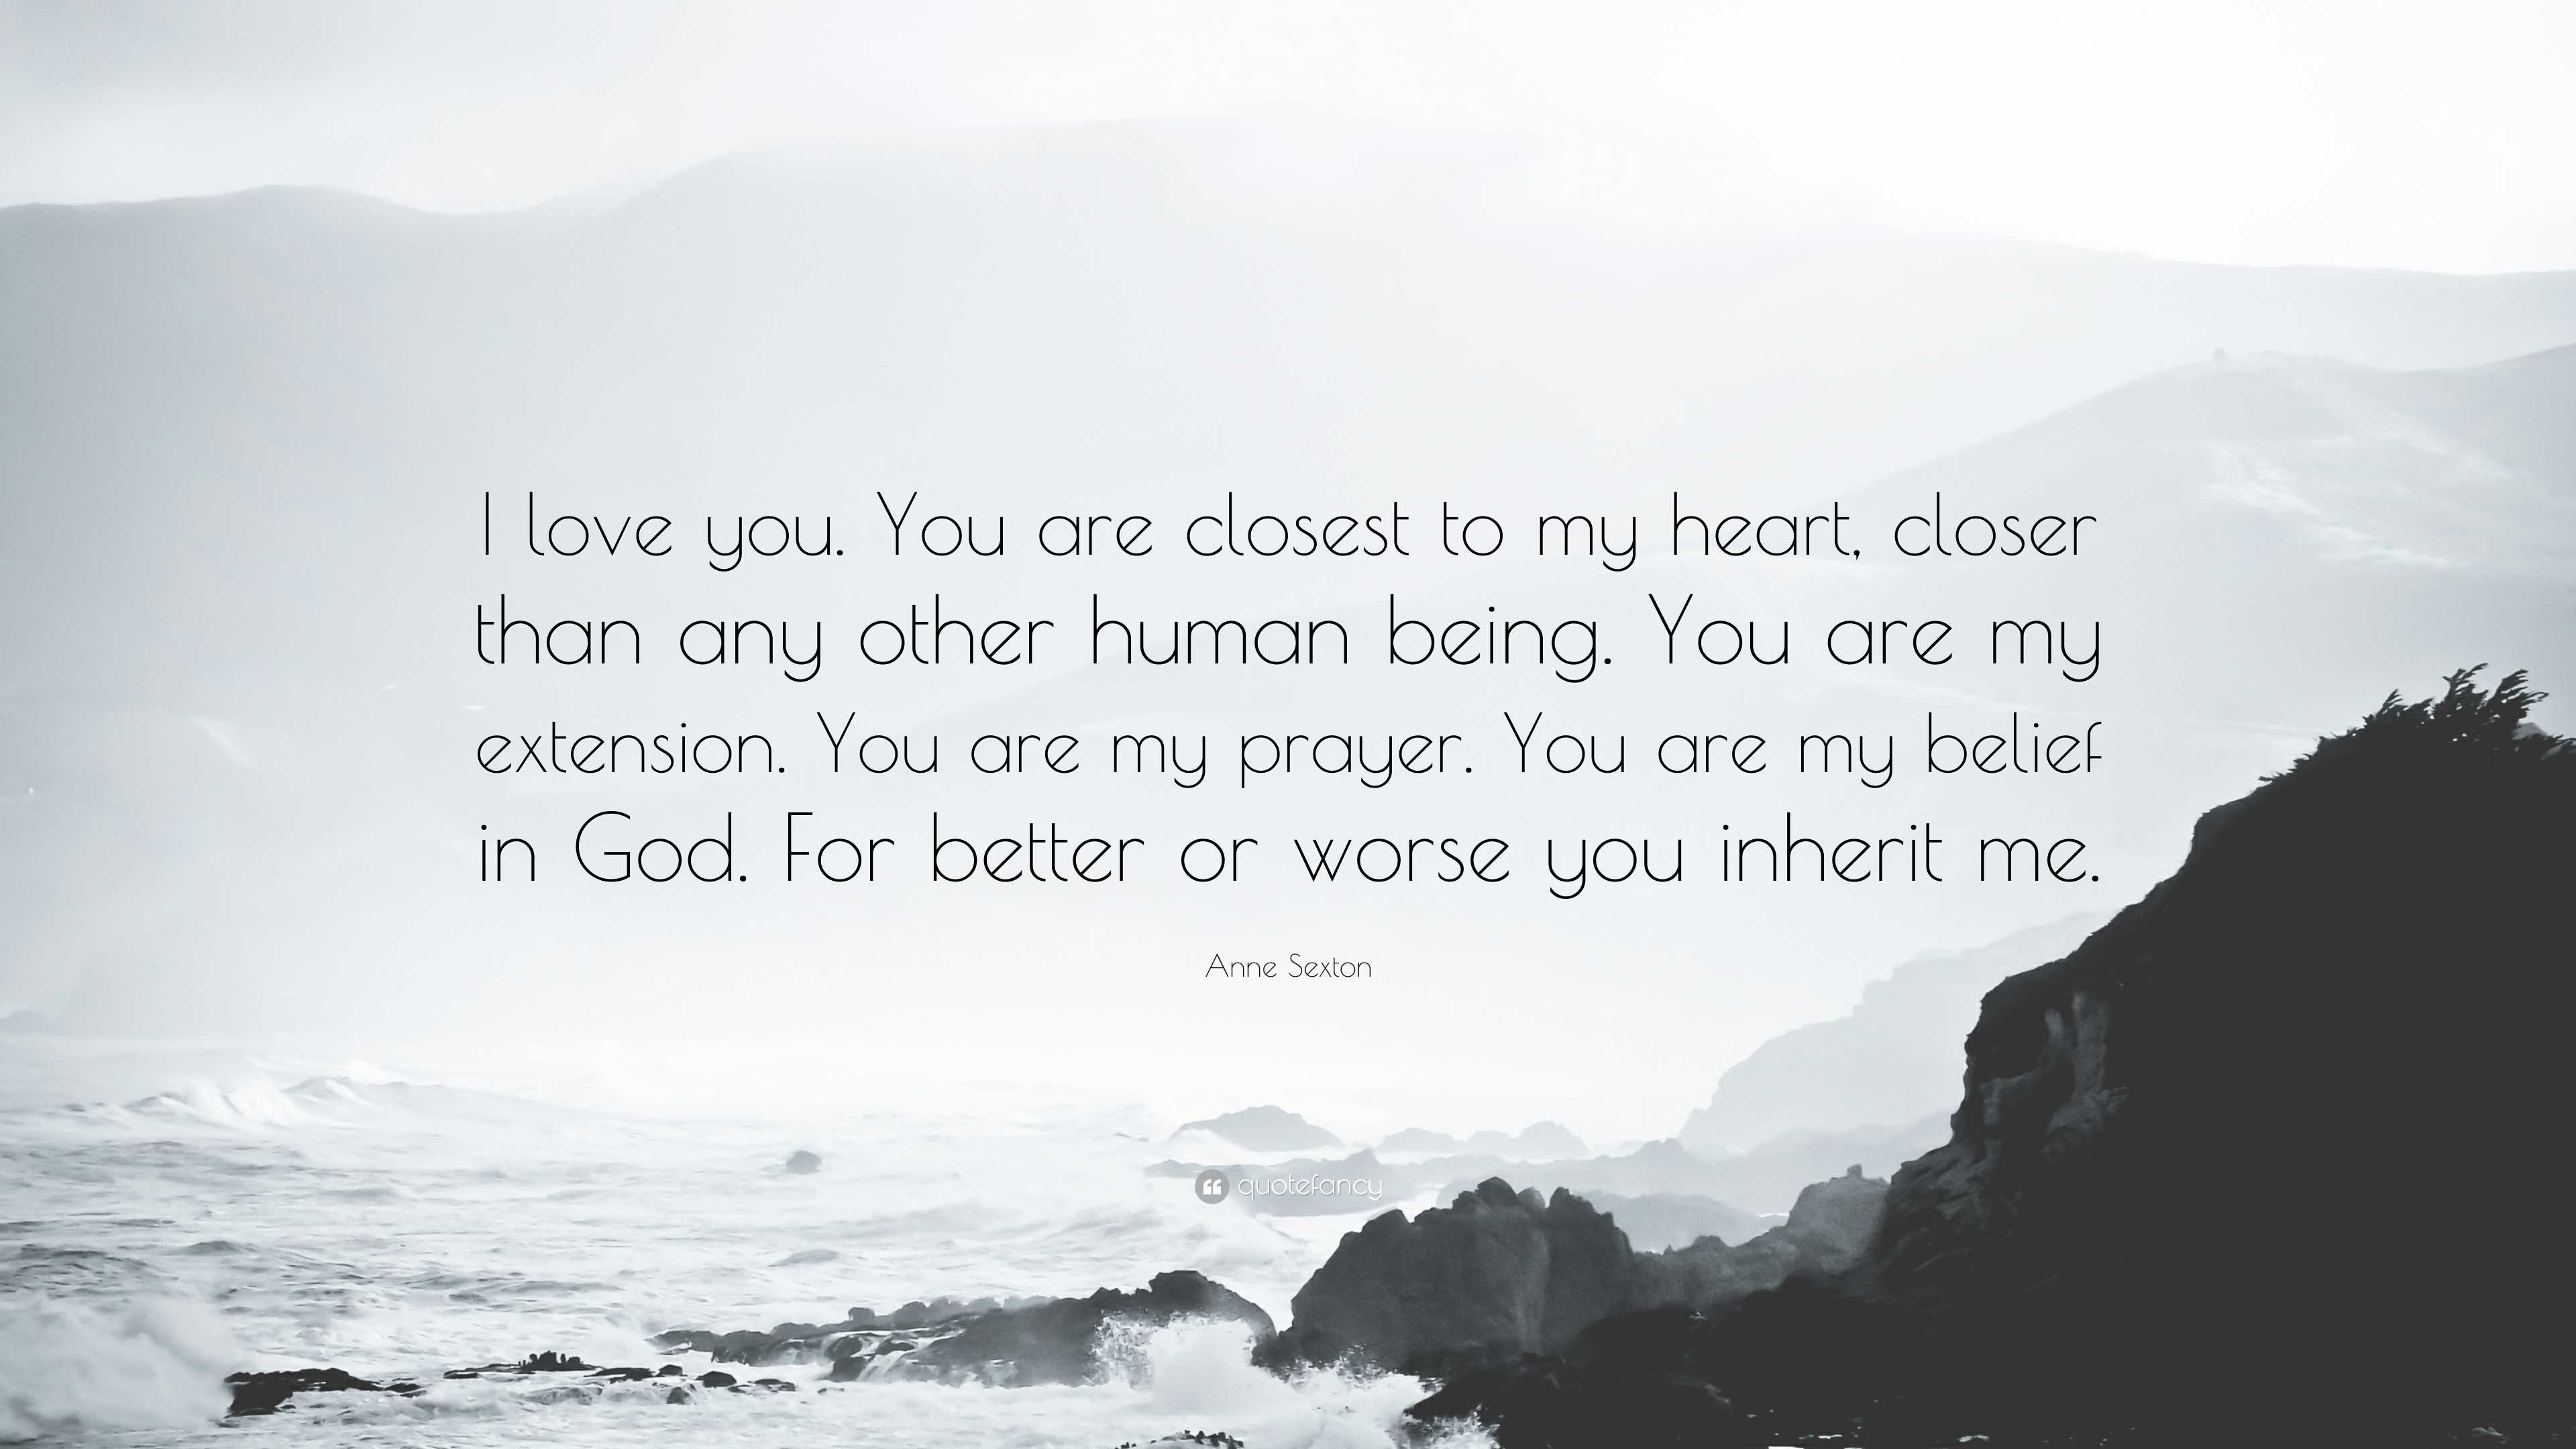 https://quotefancy.com/media/wallpaper/3840x2160/7938227-Anne-Sexton-Quote-I-love-you-You-are-closest-to-my-heart-closer.jpg